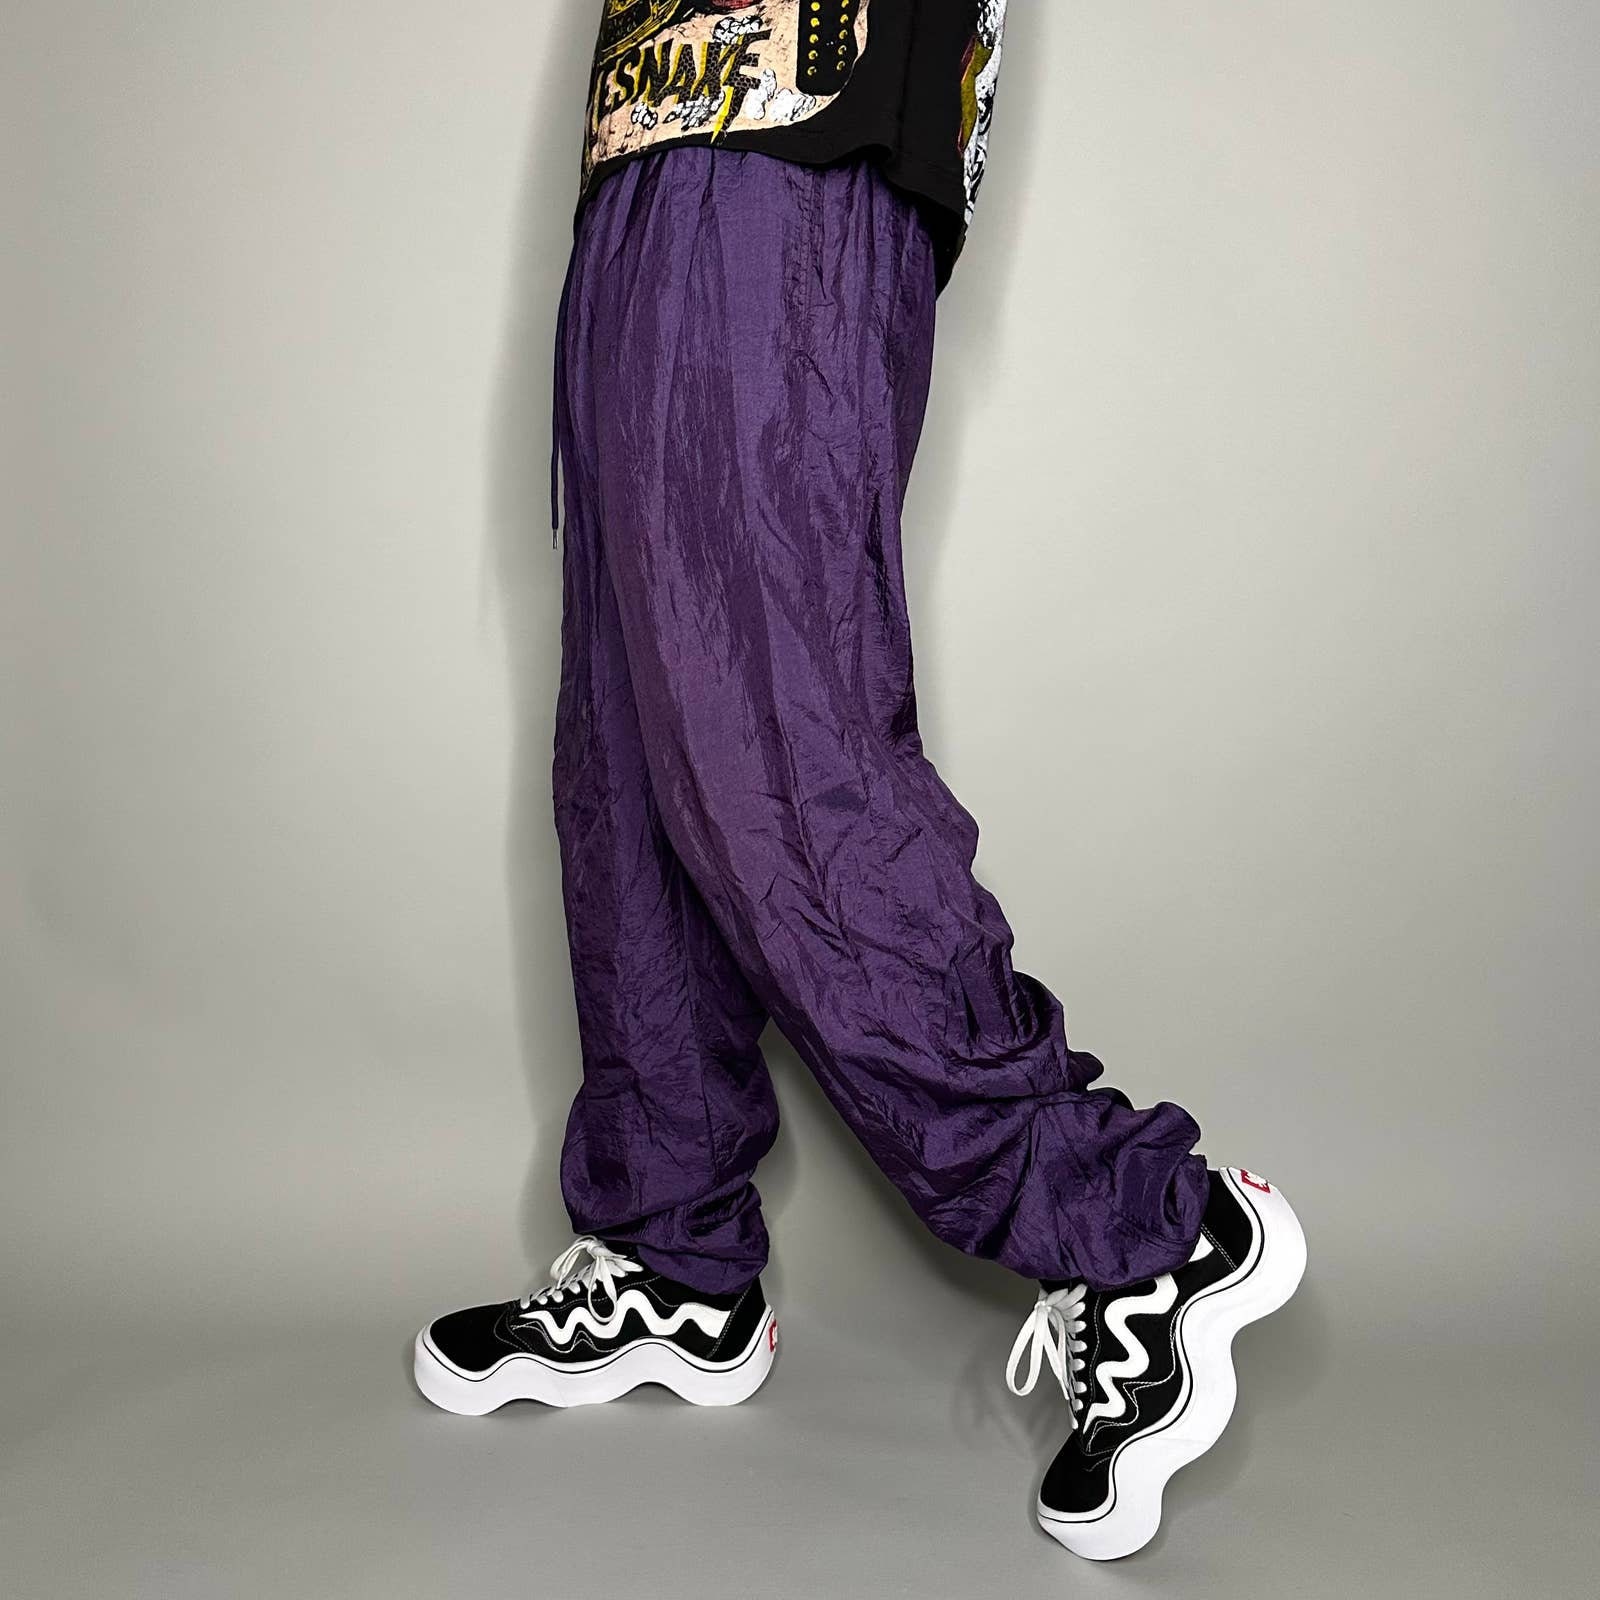 Stay stylish and comfortable in this vibrant purple track suit